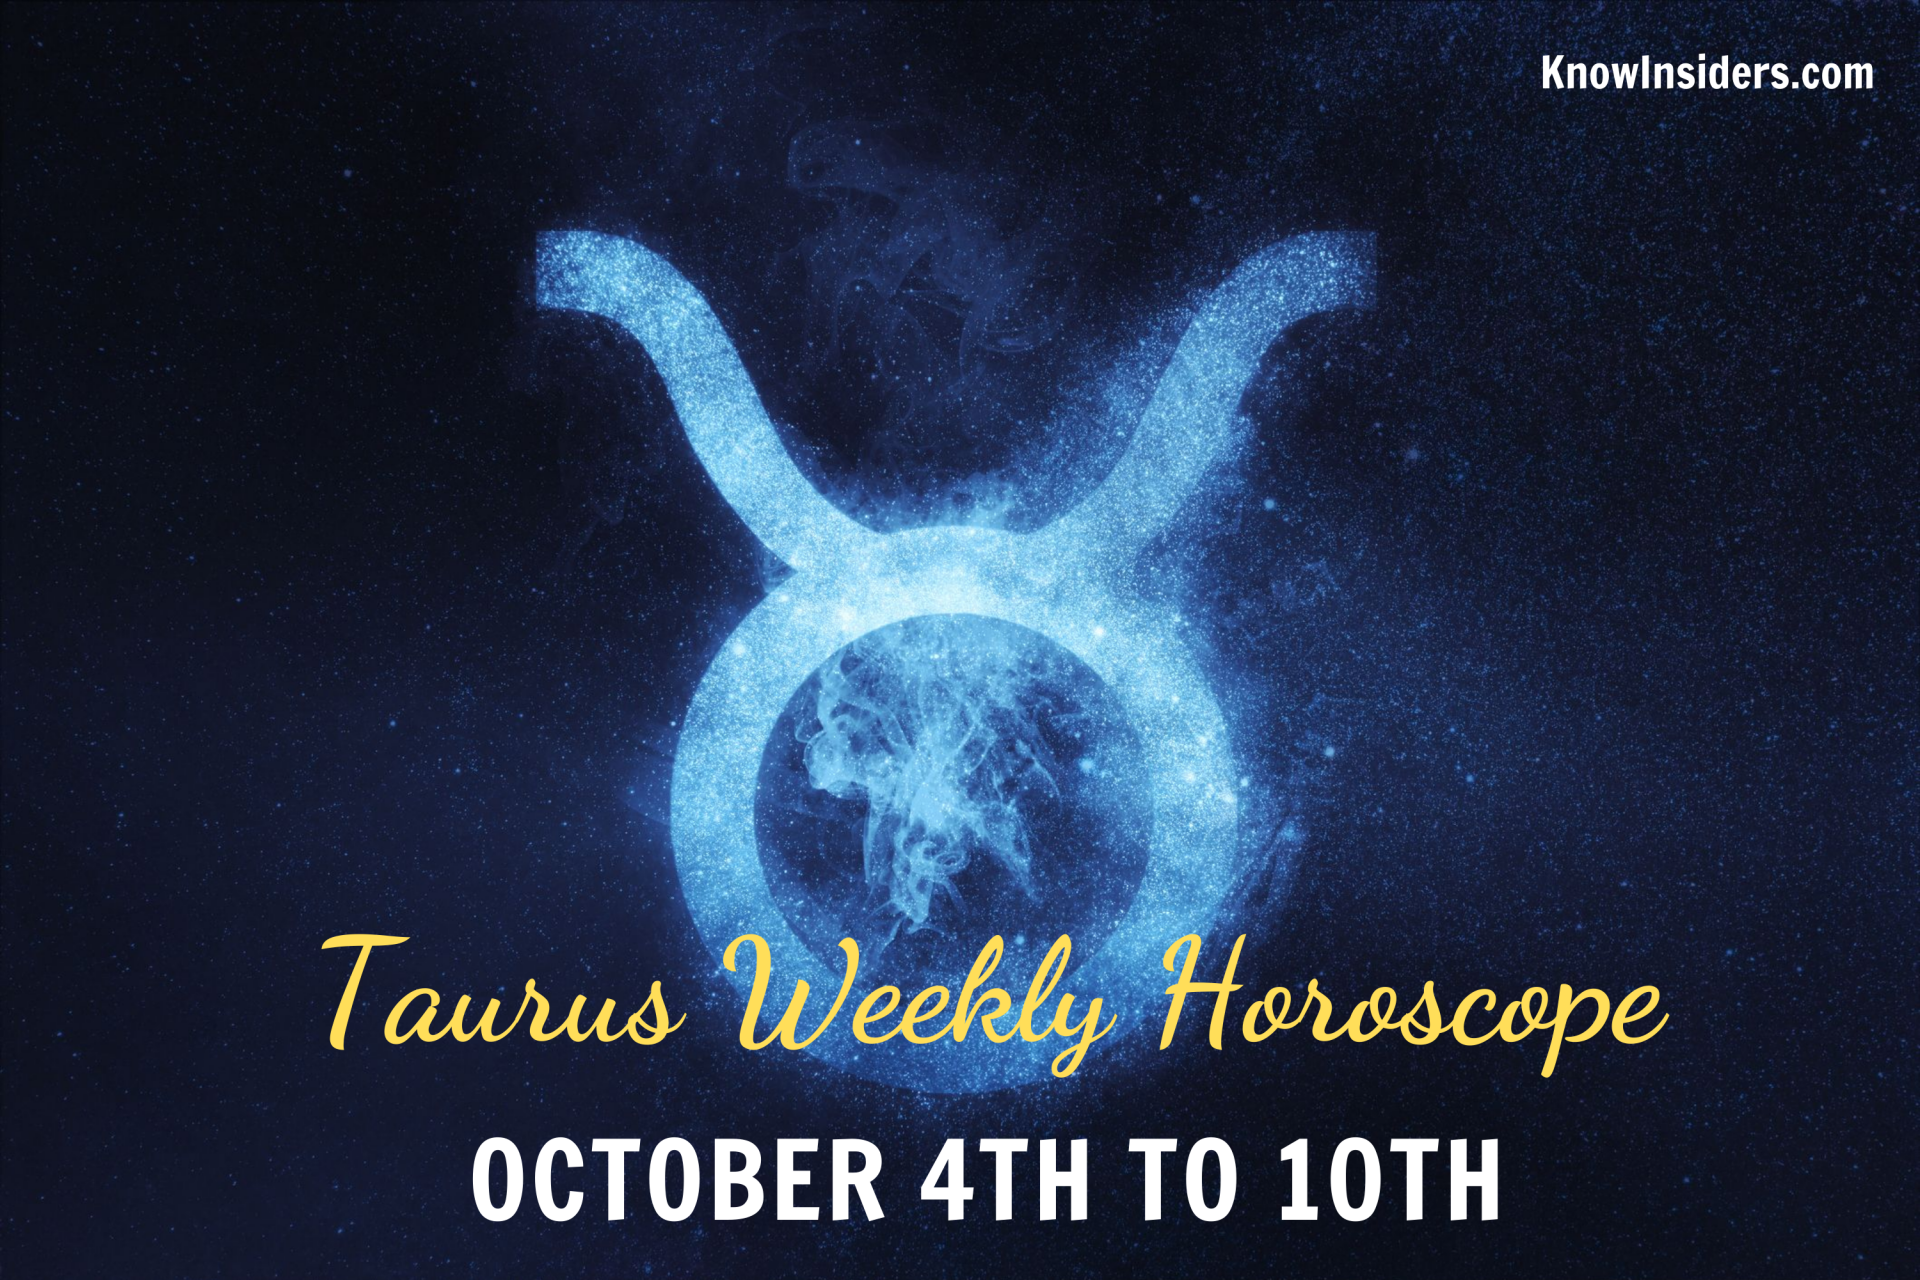 TAURUS Weekly Horoscope 4 to 10 October 2021: Prediction for Love, Money, Career and Health